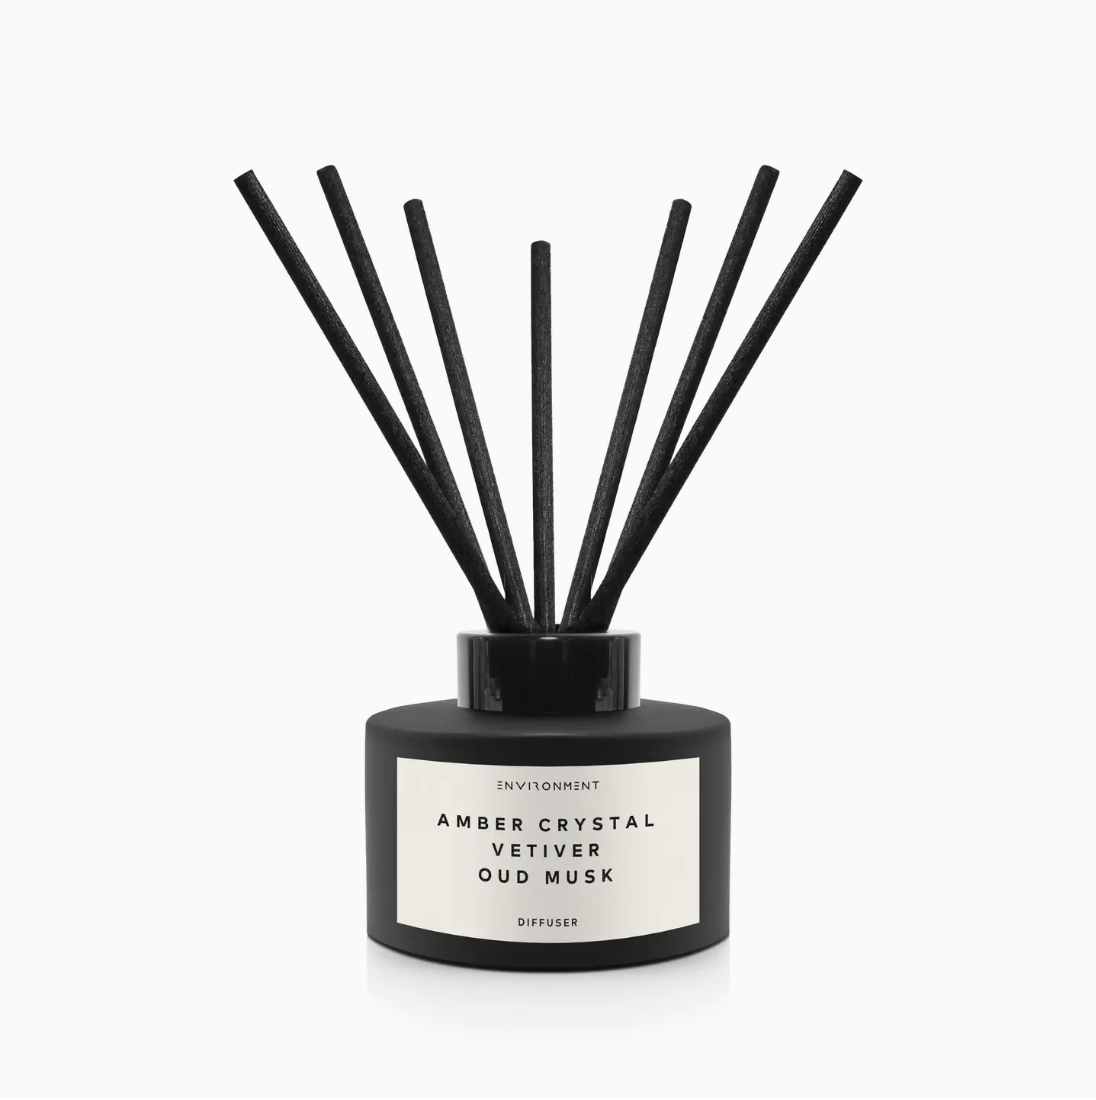 A black Faire aromatic diffuser with white text that reads "Inspired By Baccarat Rouge 540® Diffuser Amber Crystal | Vet." It has several black sticks inserted into the square-shaped bottle, set against a white background.